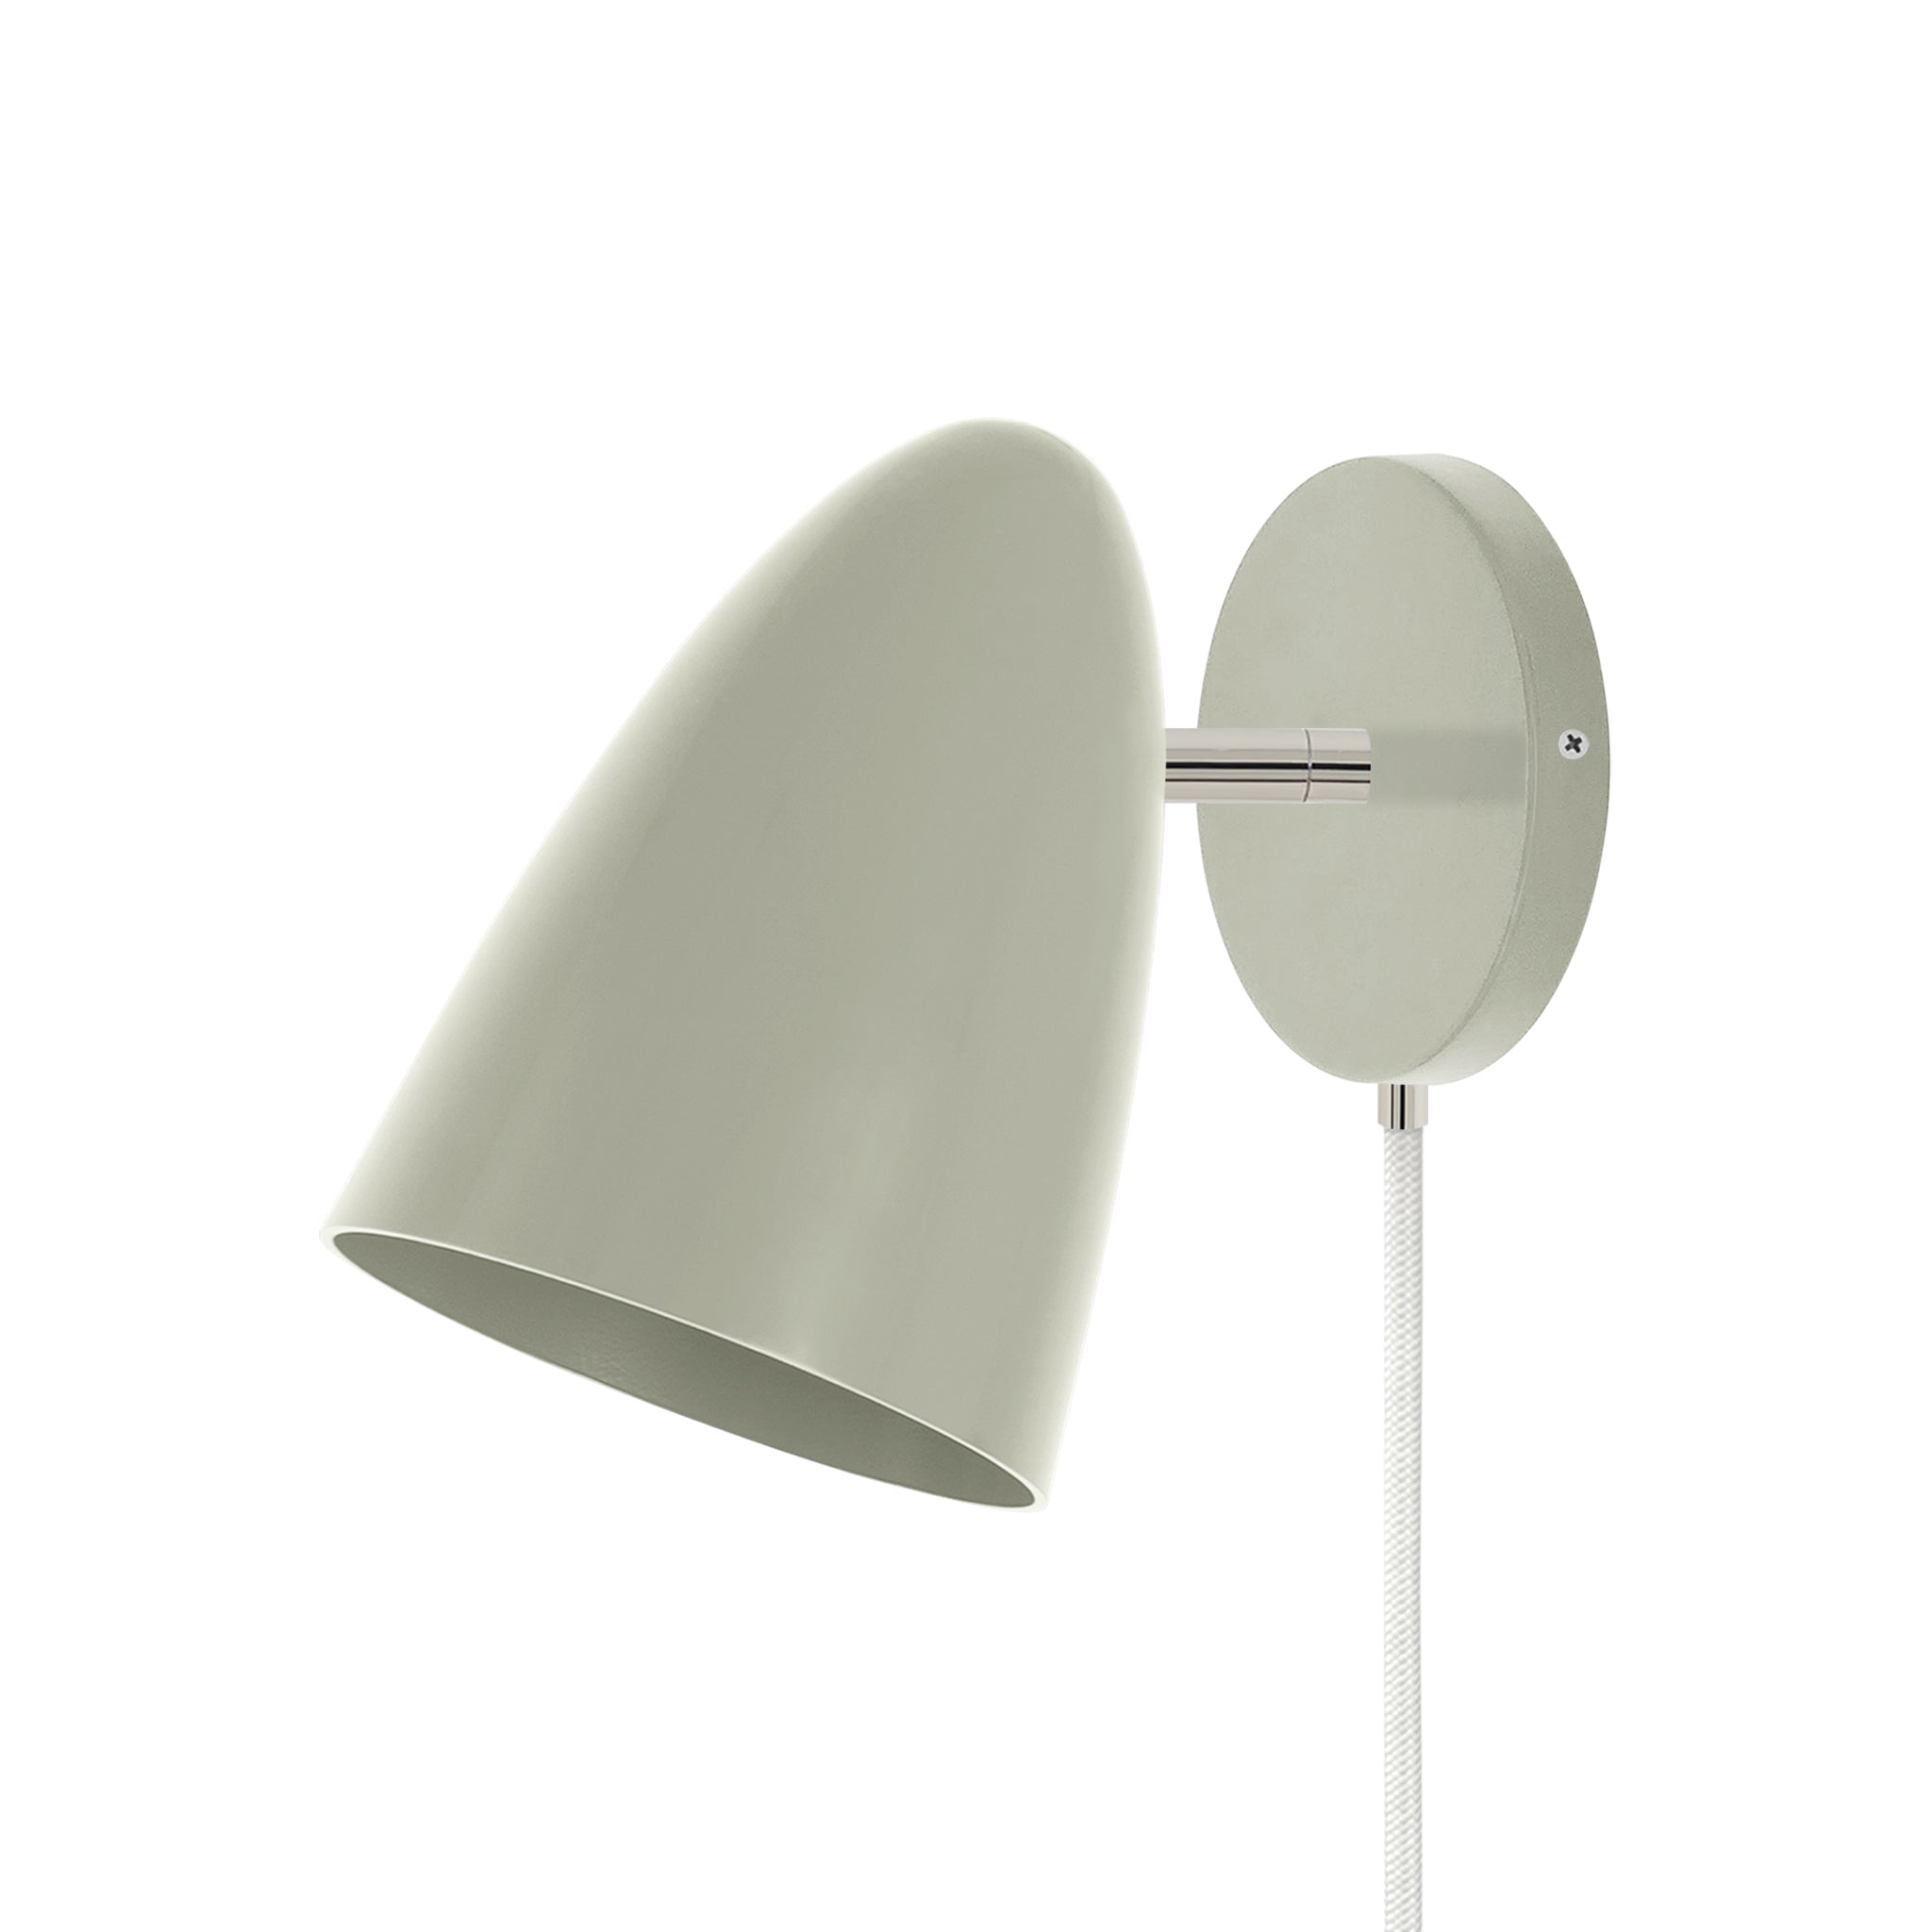 Nickel and spa color Boom plug-in sconce no arm Dutton Brown lighting